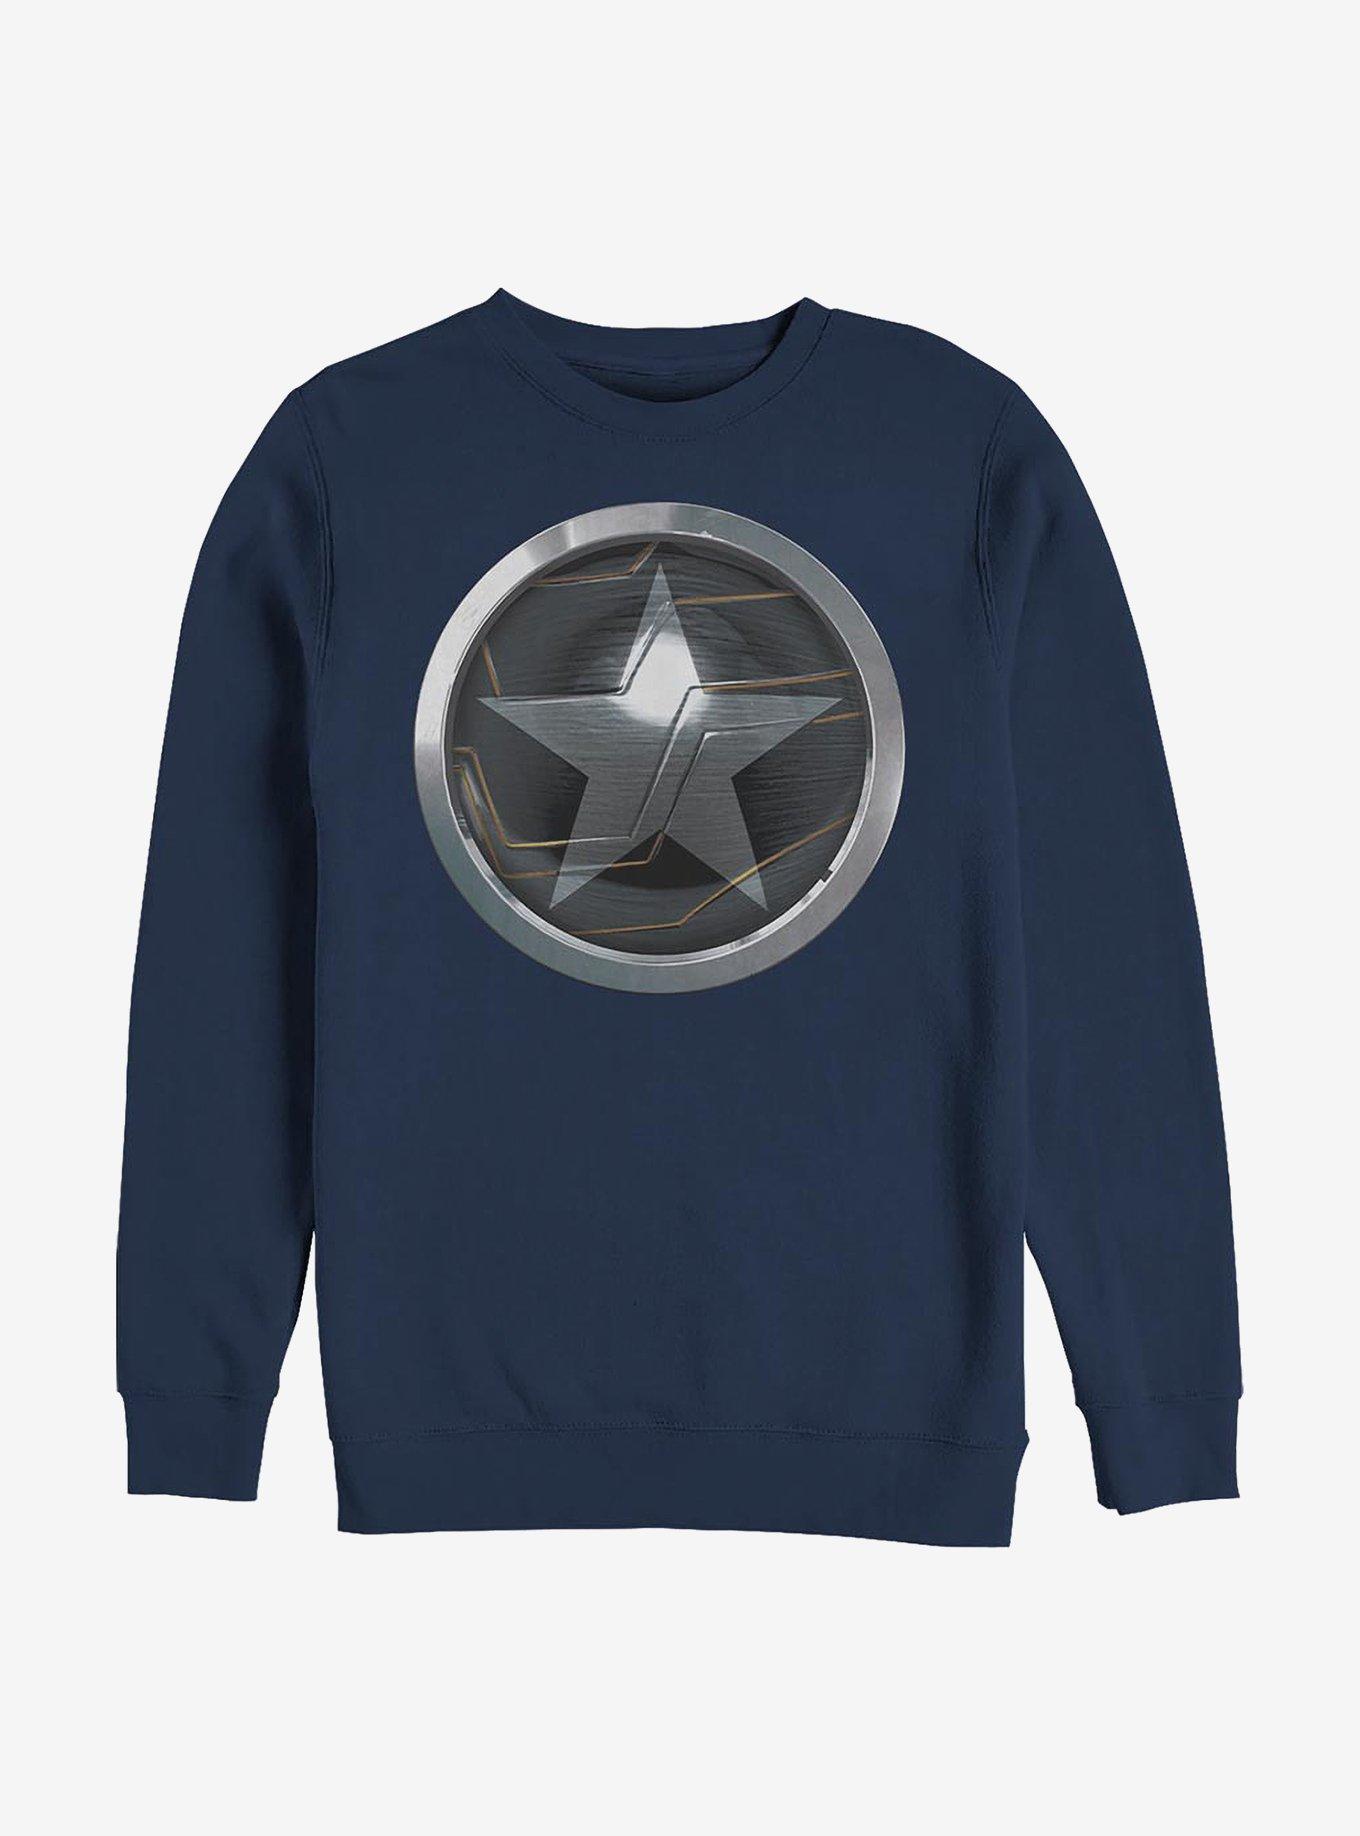 Marvel The Falcon And The Winter Soldier Logo Crew Sweatshirt, NAVY, hi-res